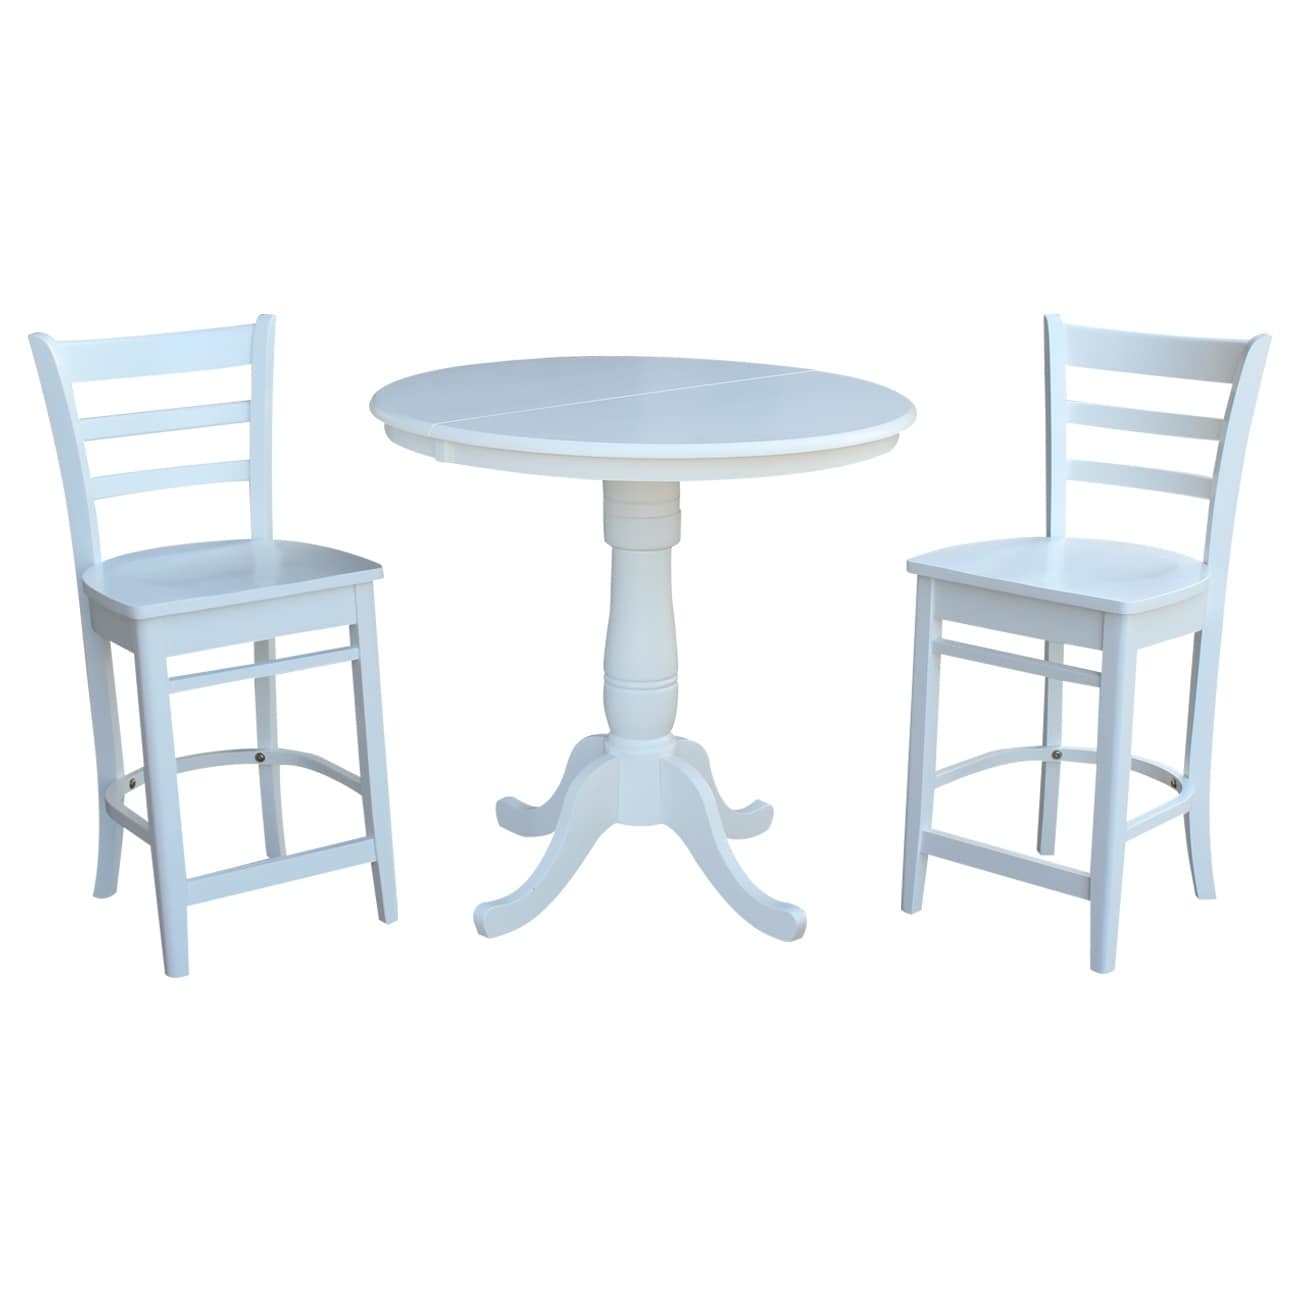 36 Round Extension Dining Table 34.9h With 2 Emily Counterheight Stools - White